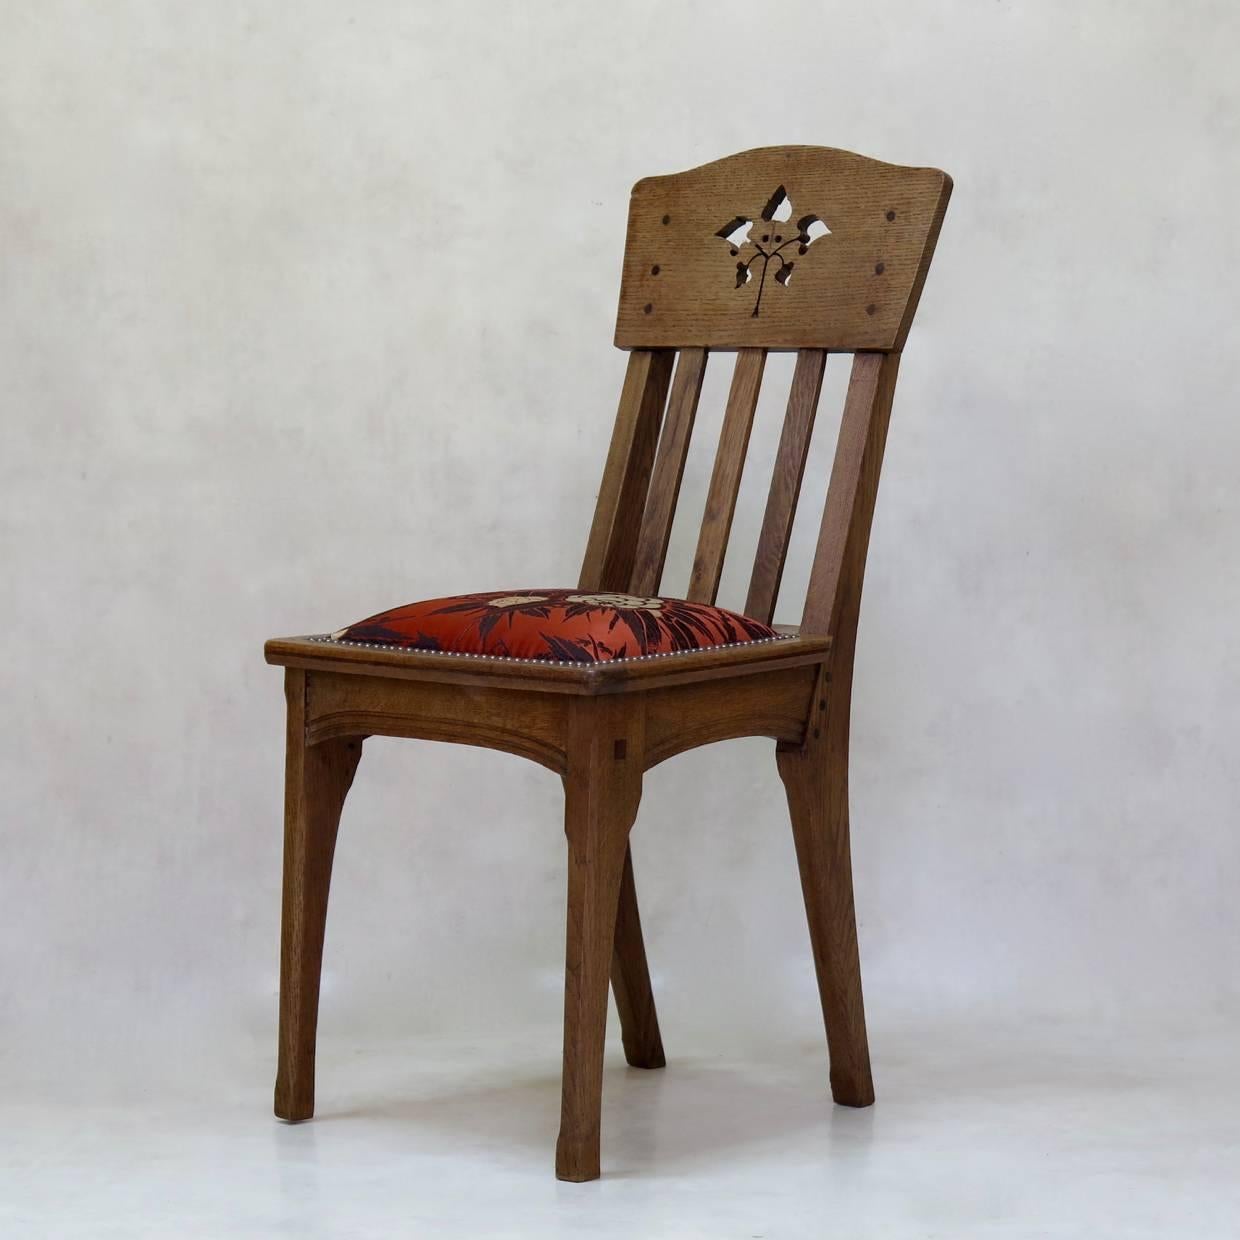 Set of six oak dining chairs by French designer Léon Jallot. Simple lines in the Arts & Crafts taste. Beautifully assembled. Cut-out leaf design on the backs. Seats upholstered in vintage Art Deco fabric.